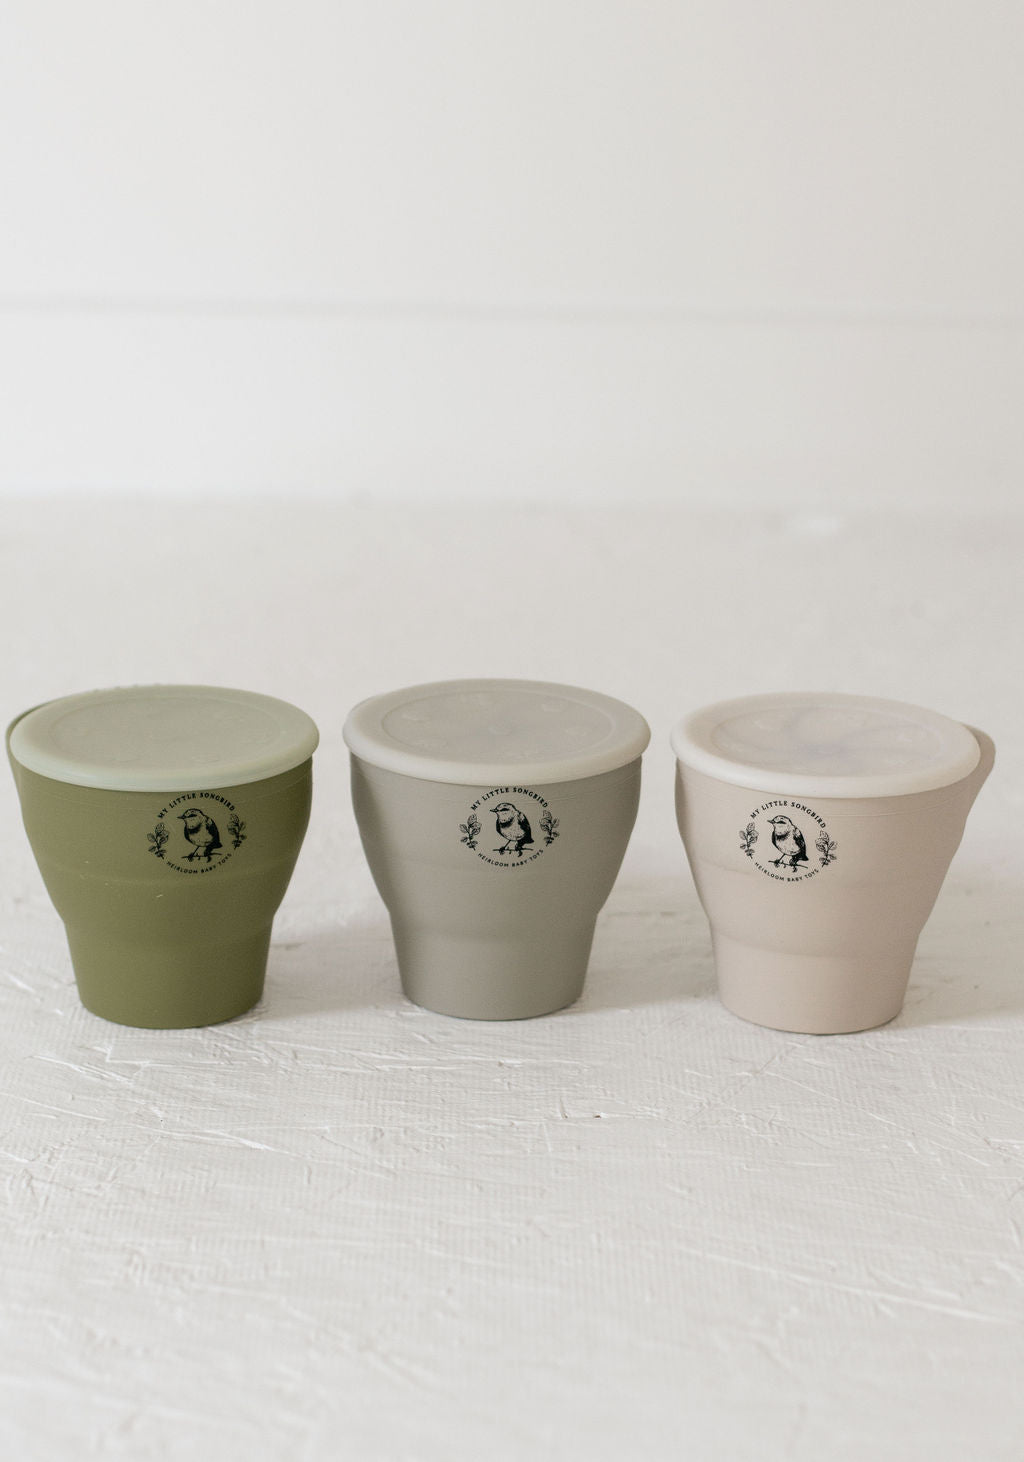 Neutral Tones Silicone dinnerware from My Little Songbird